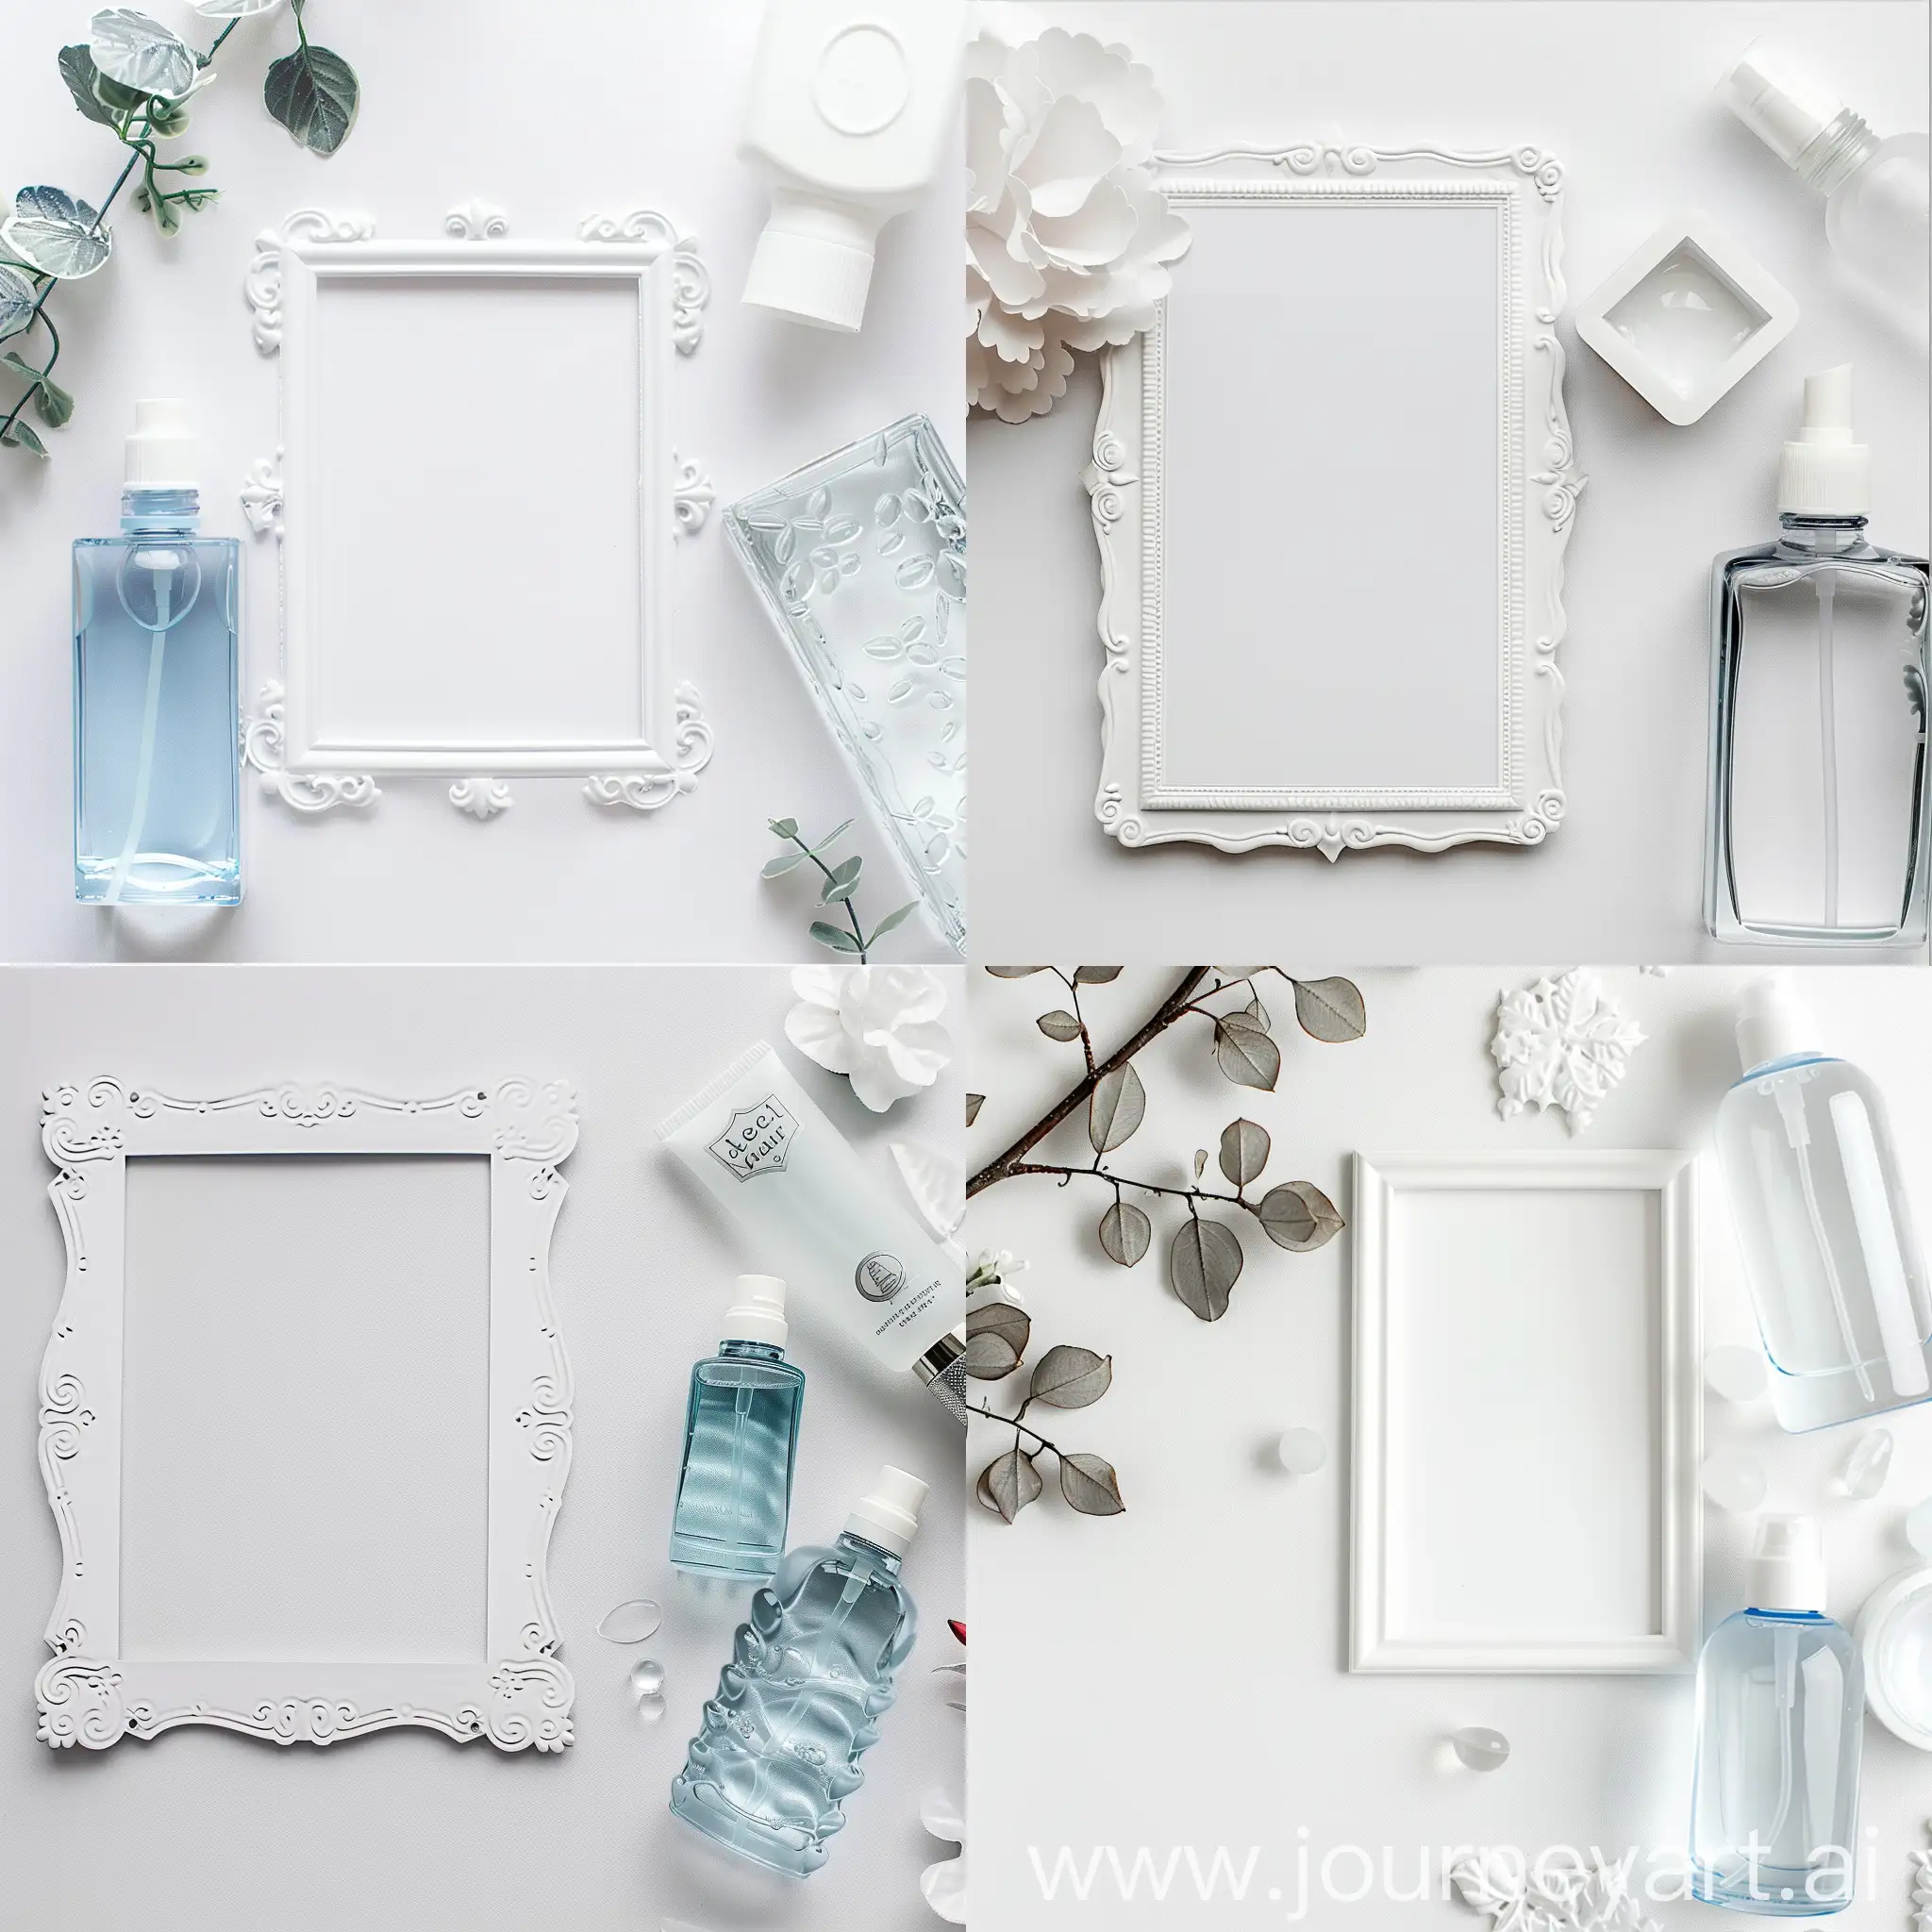 Instagram-Cosmetics-Flyer-Chic-White-Background-with-Toner-and-Micellar-Water